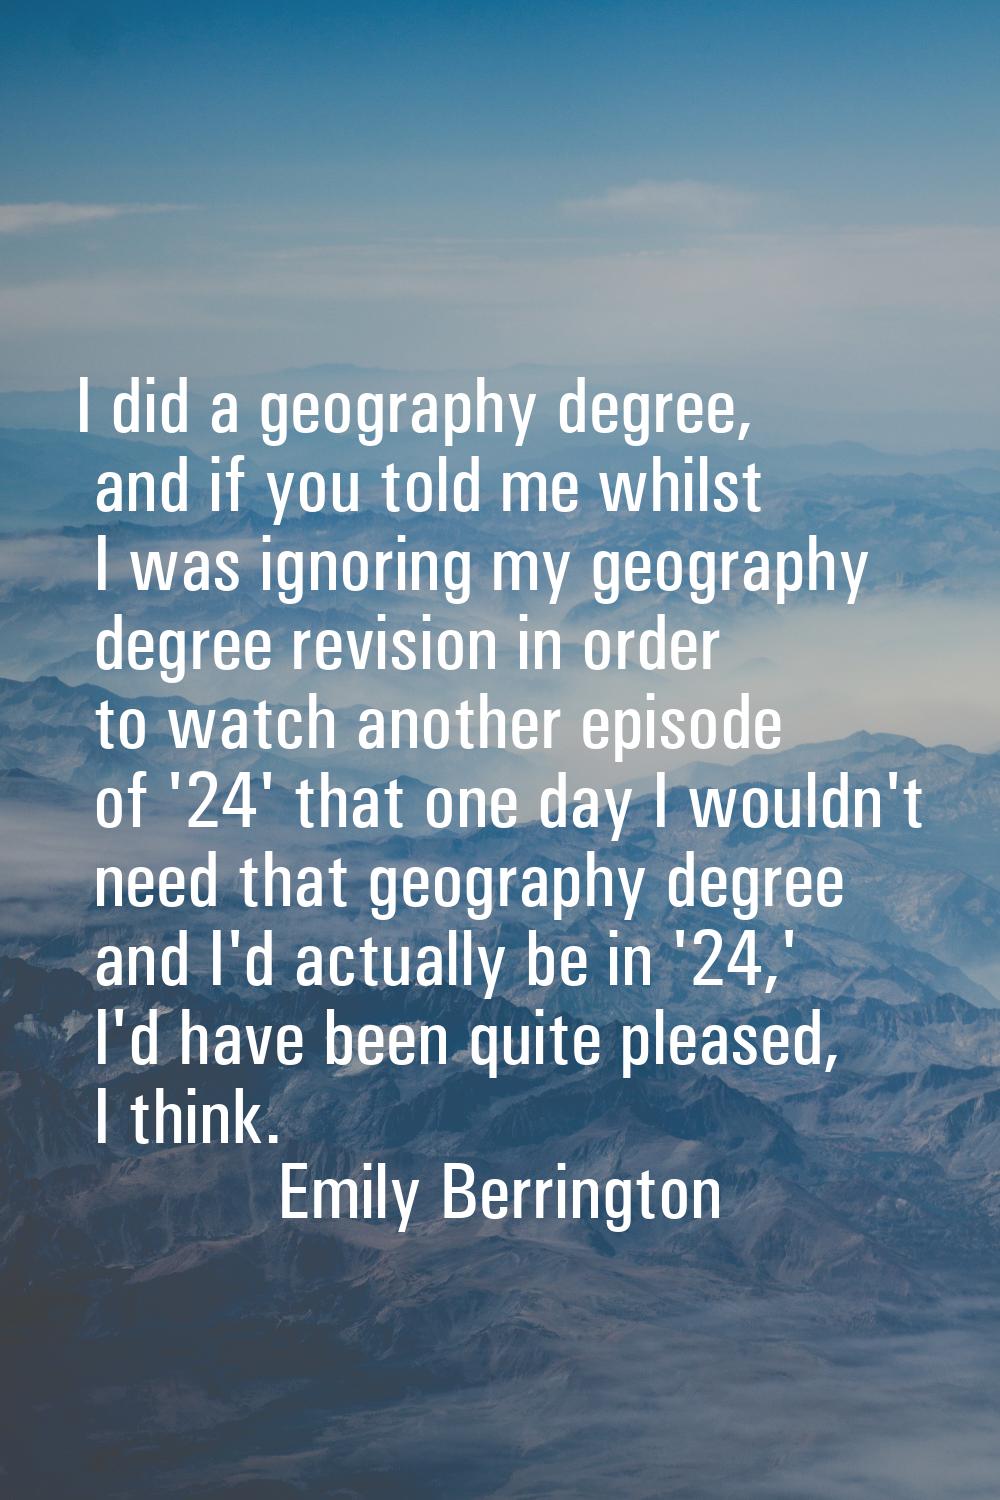 I did a geography degree, and if you told me whilst I was ignoring my geography degree revision in 